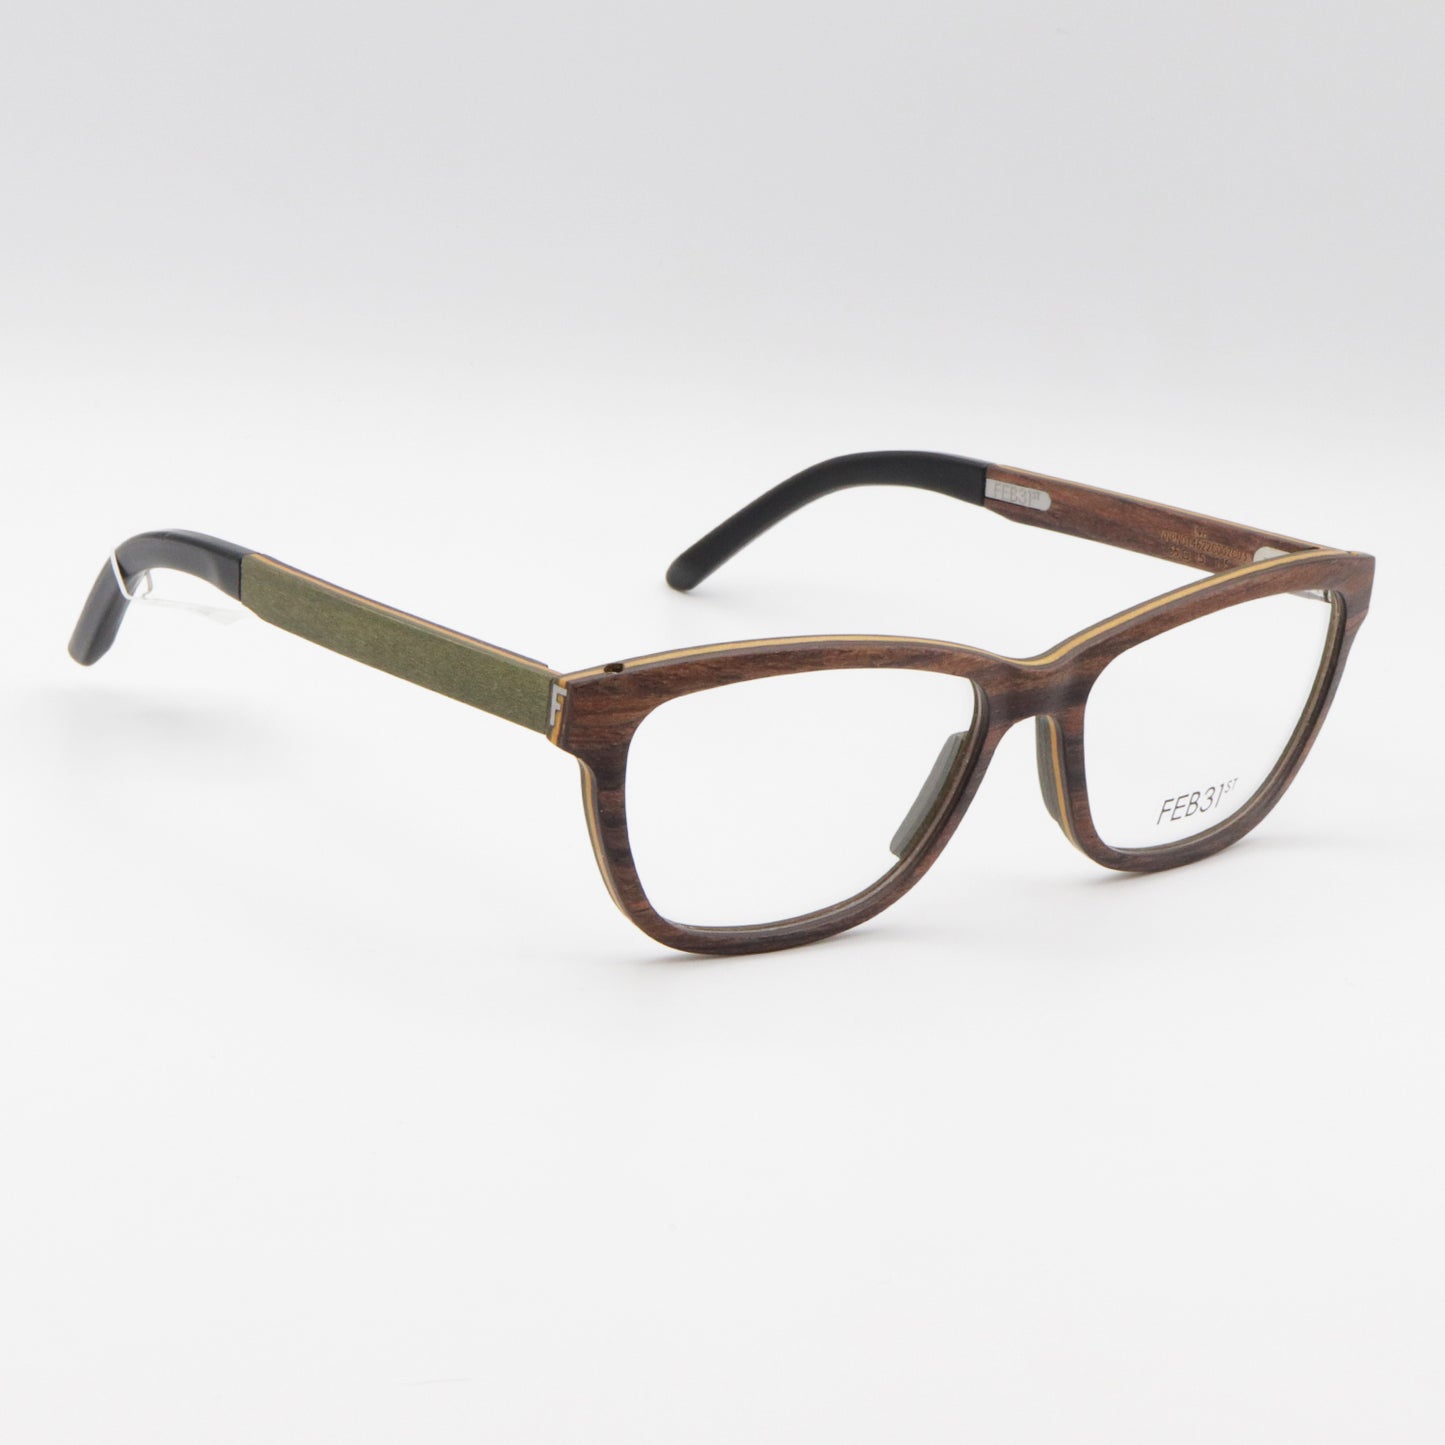 Eva by by FEB31st wooden glasses Brown and Green